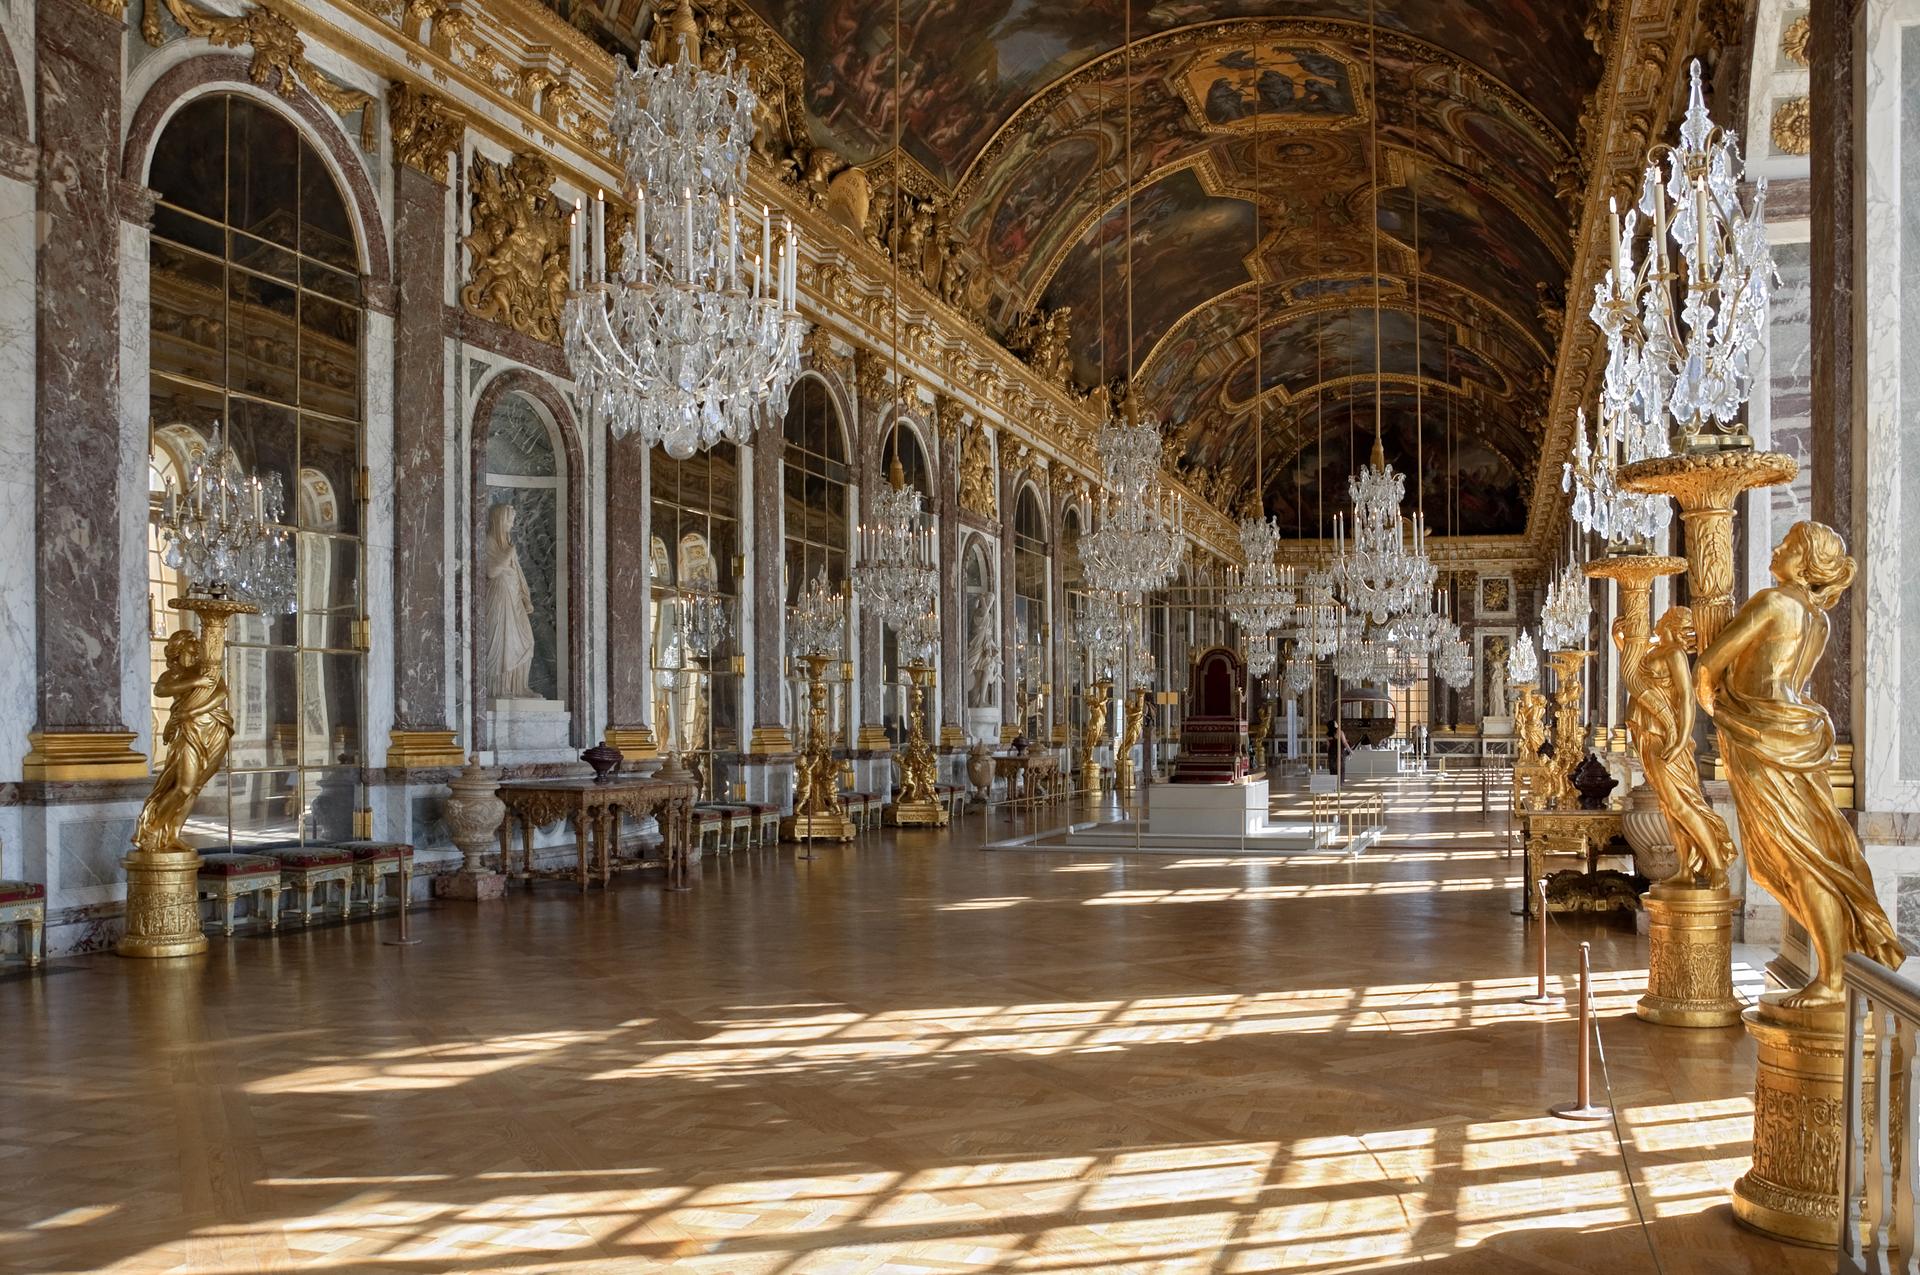 The Hall of Mirrors in the Palace of Versailles.